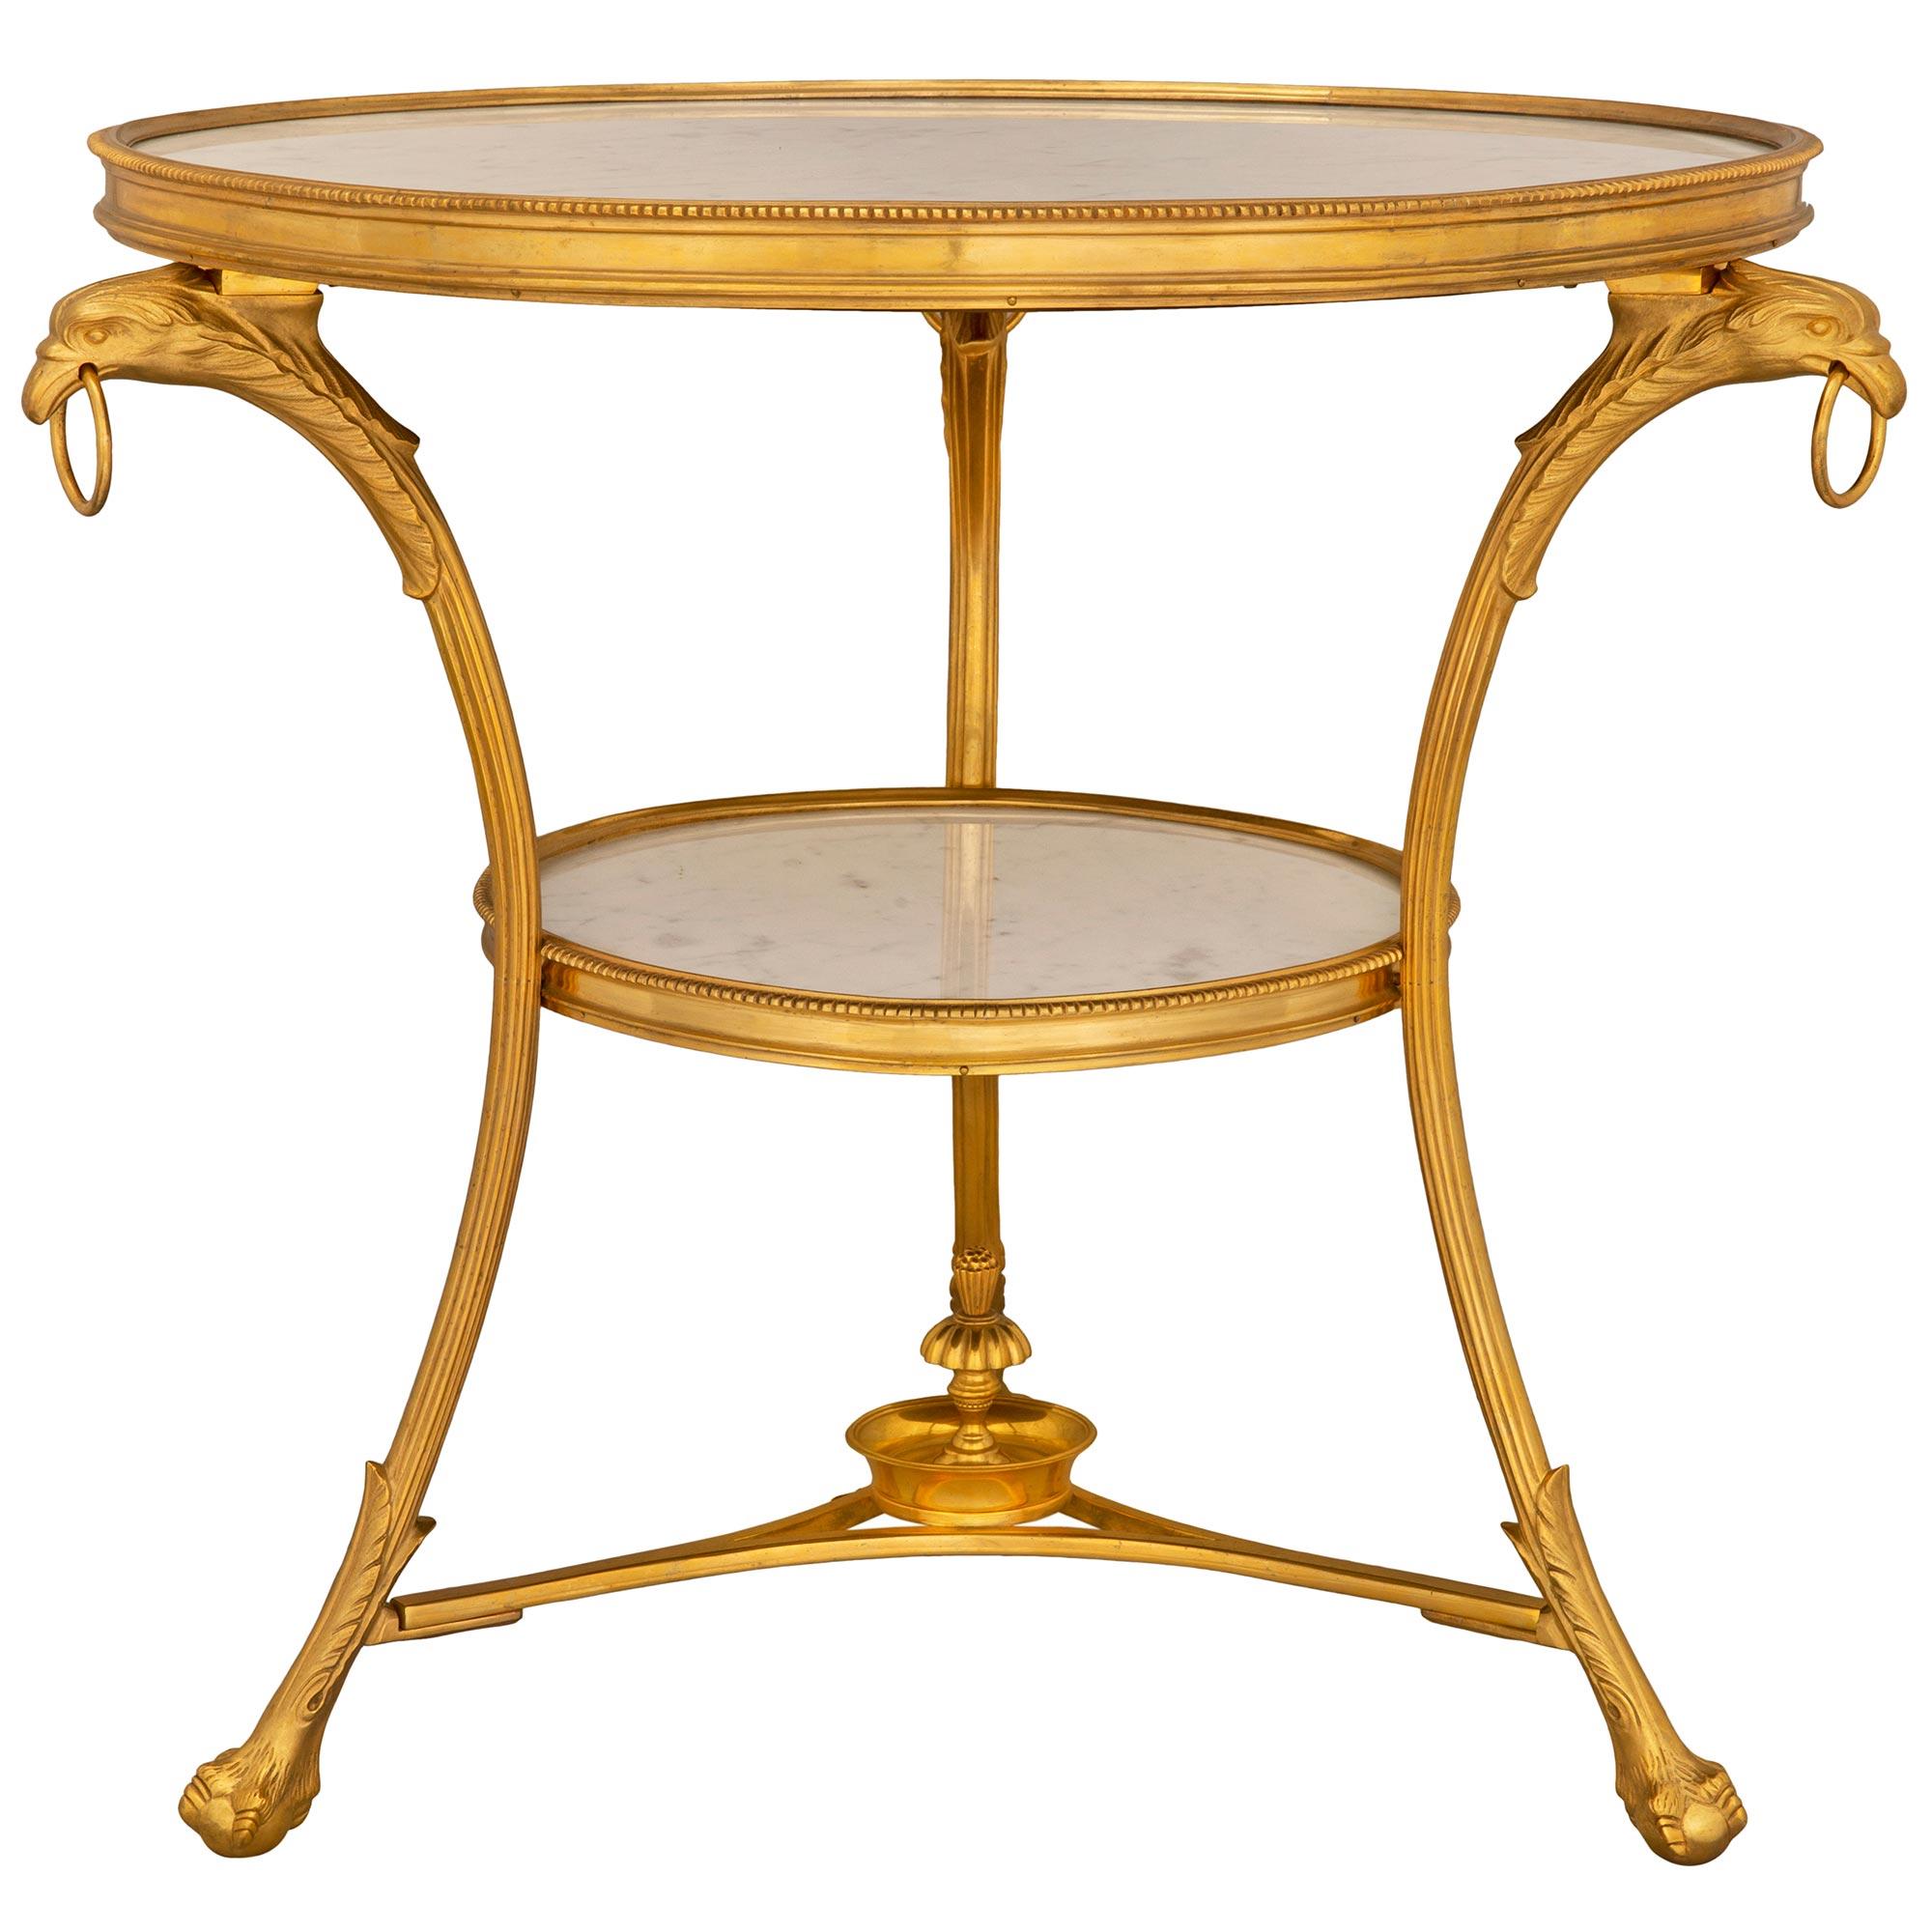 A striking and most elegant French 19th century Louis XVI st. ormolu and white Carrara marble gueridon side tables. Each table is raised by three lightly curved legs with handsome ball and claw feet adorned with superb acanthus leaves, and each